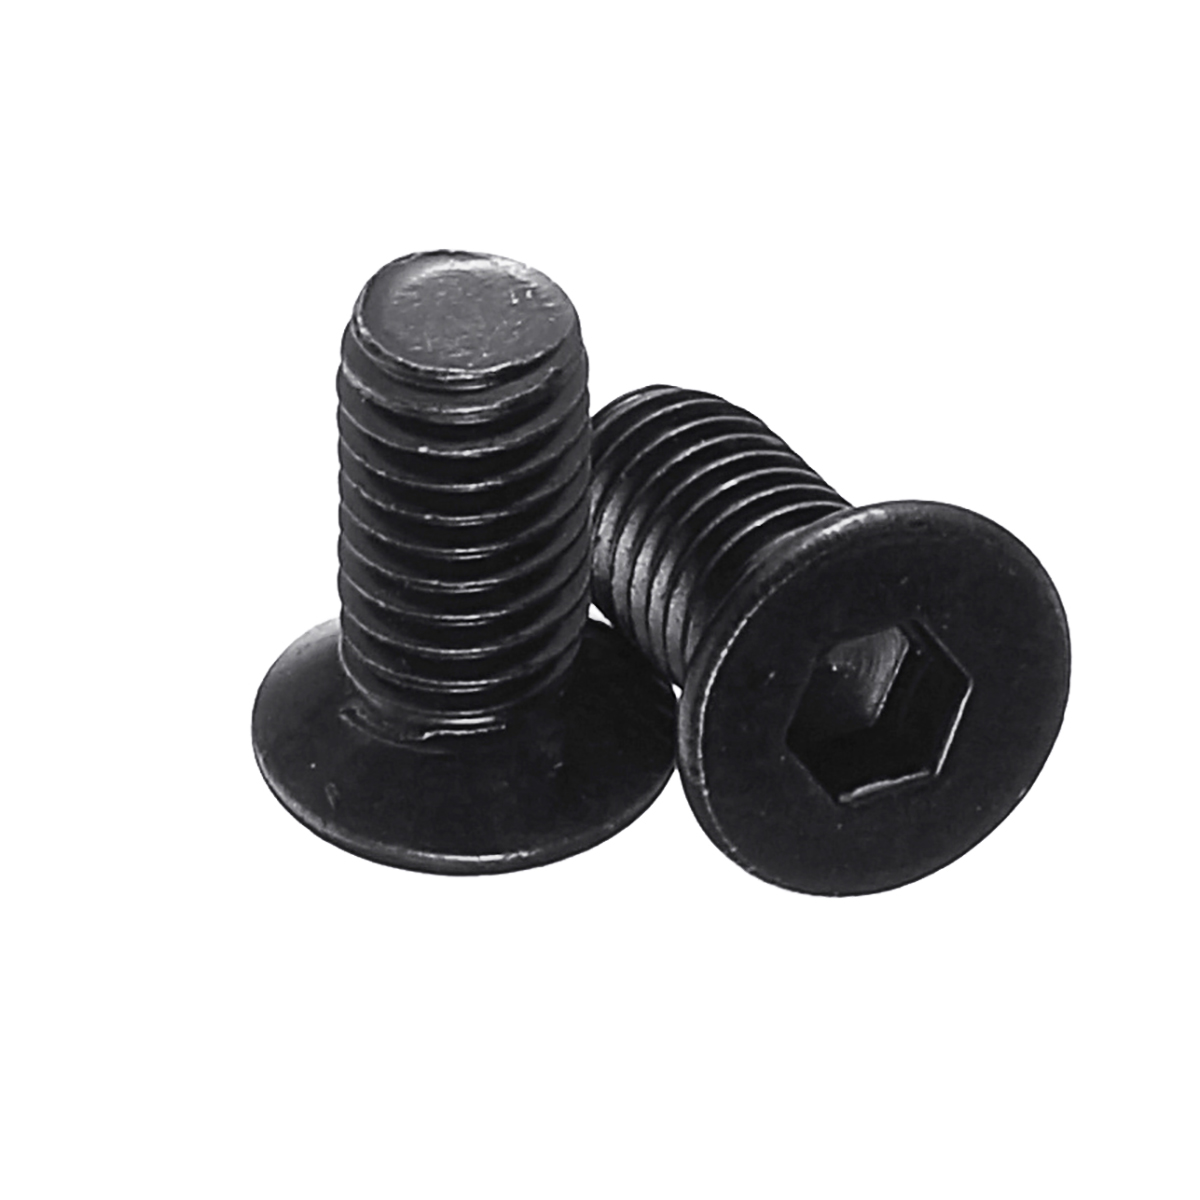 

2Pcs Screw Replacement Parts Durable For Xiaomi Mijia M365 M187 Electric Scooter